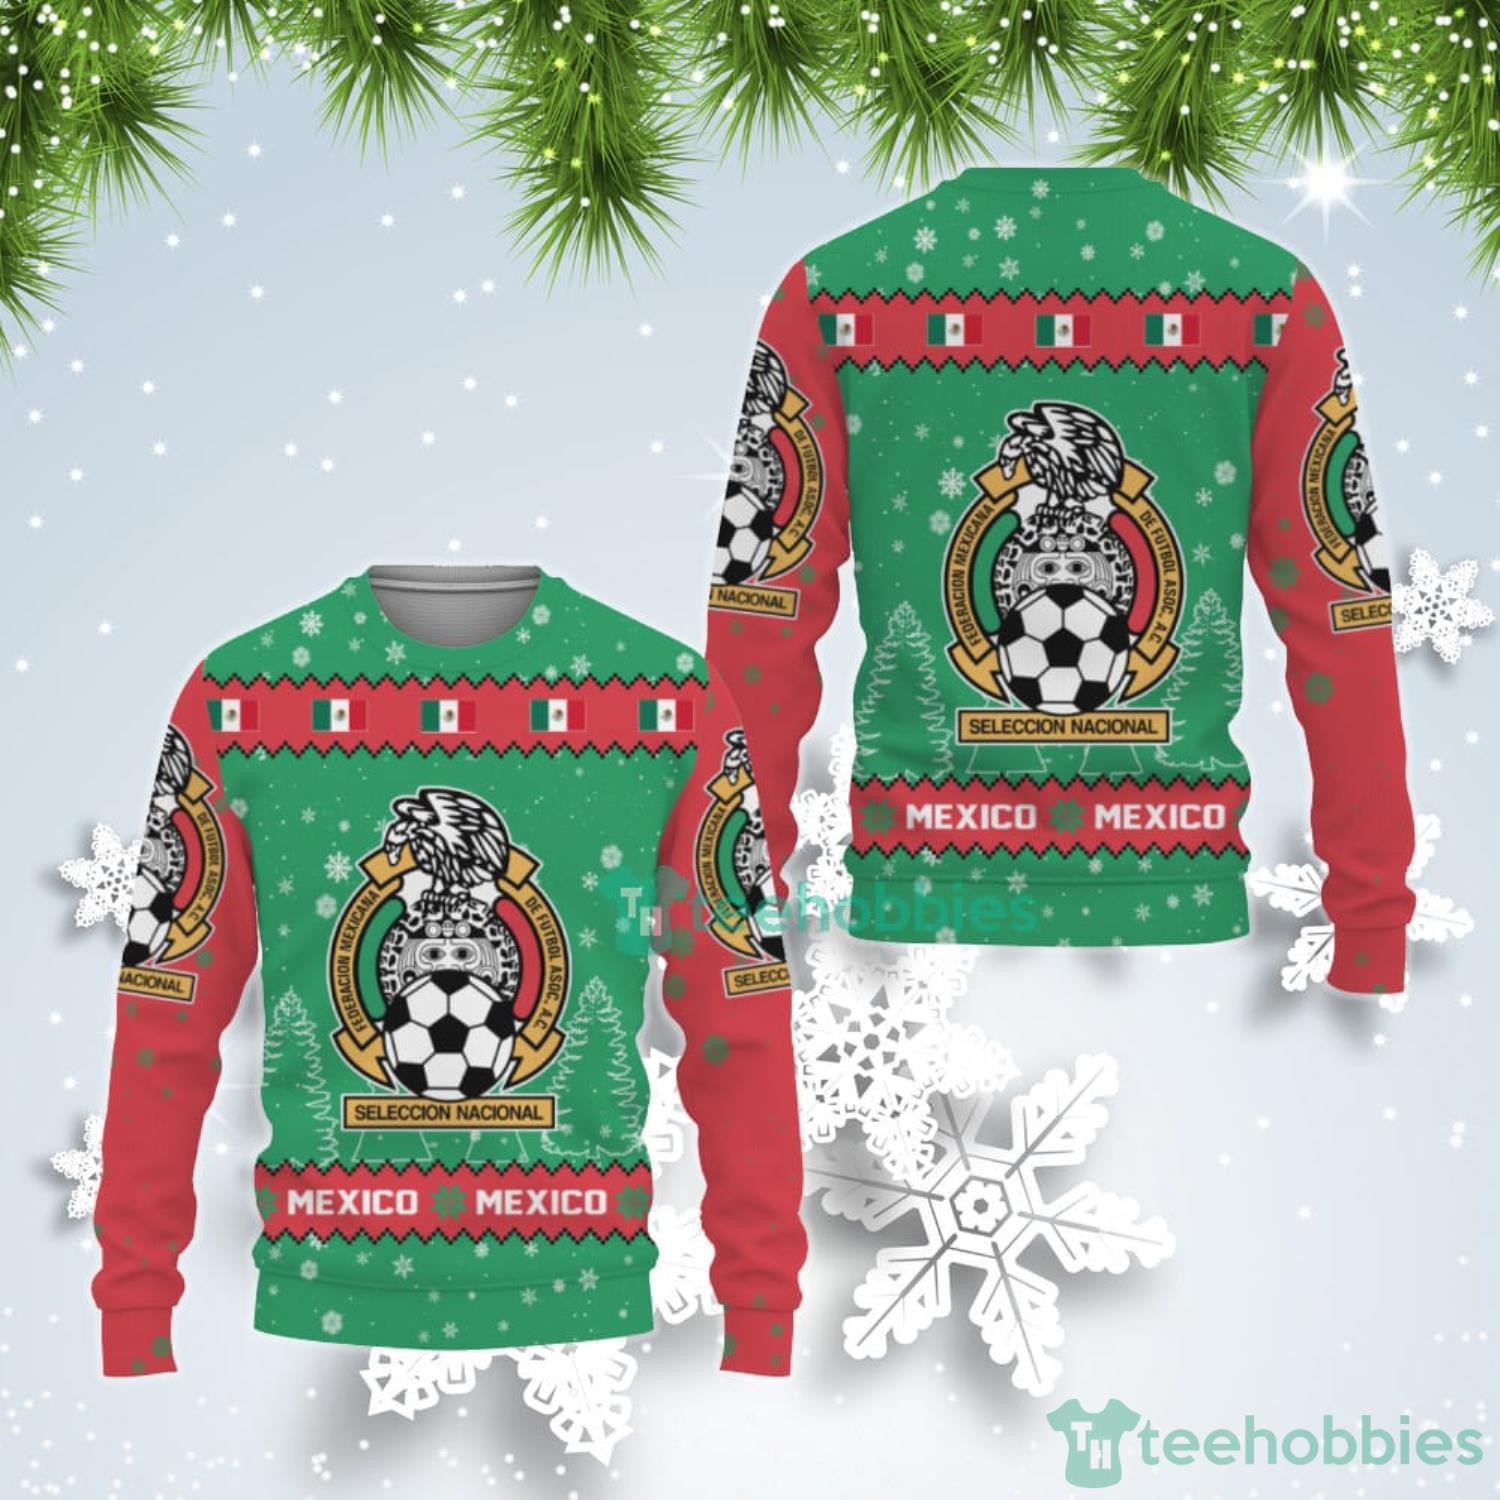 Mexico National Soccer Team Qatar World Cup 2022 Winter Season Ugly Christmas Sweater Product Photo 1